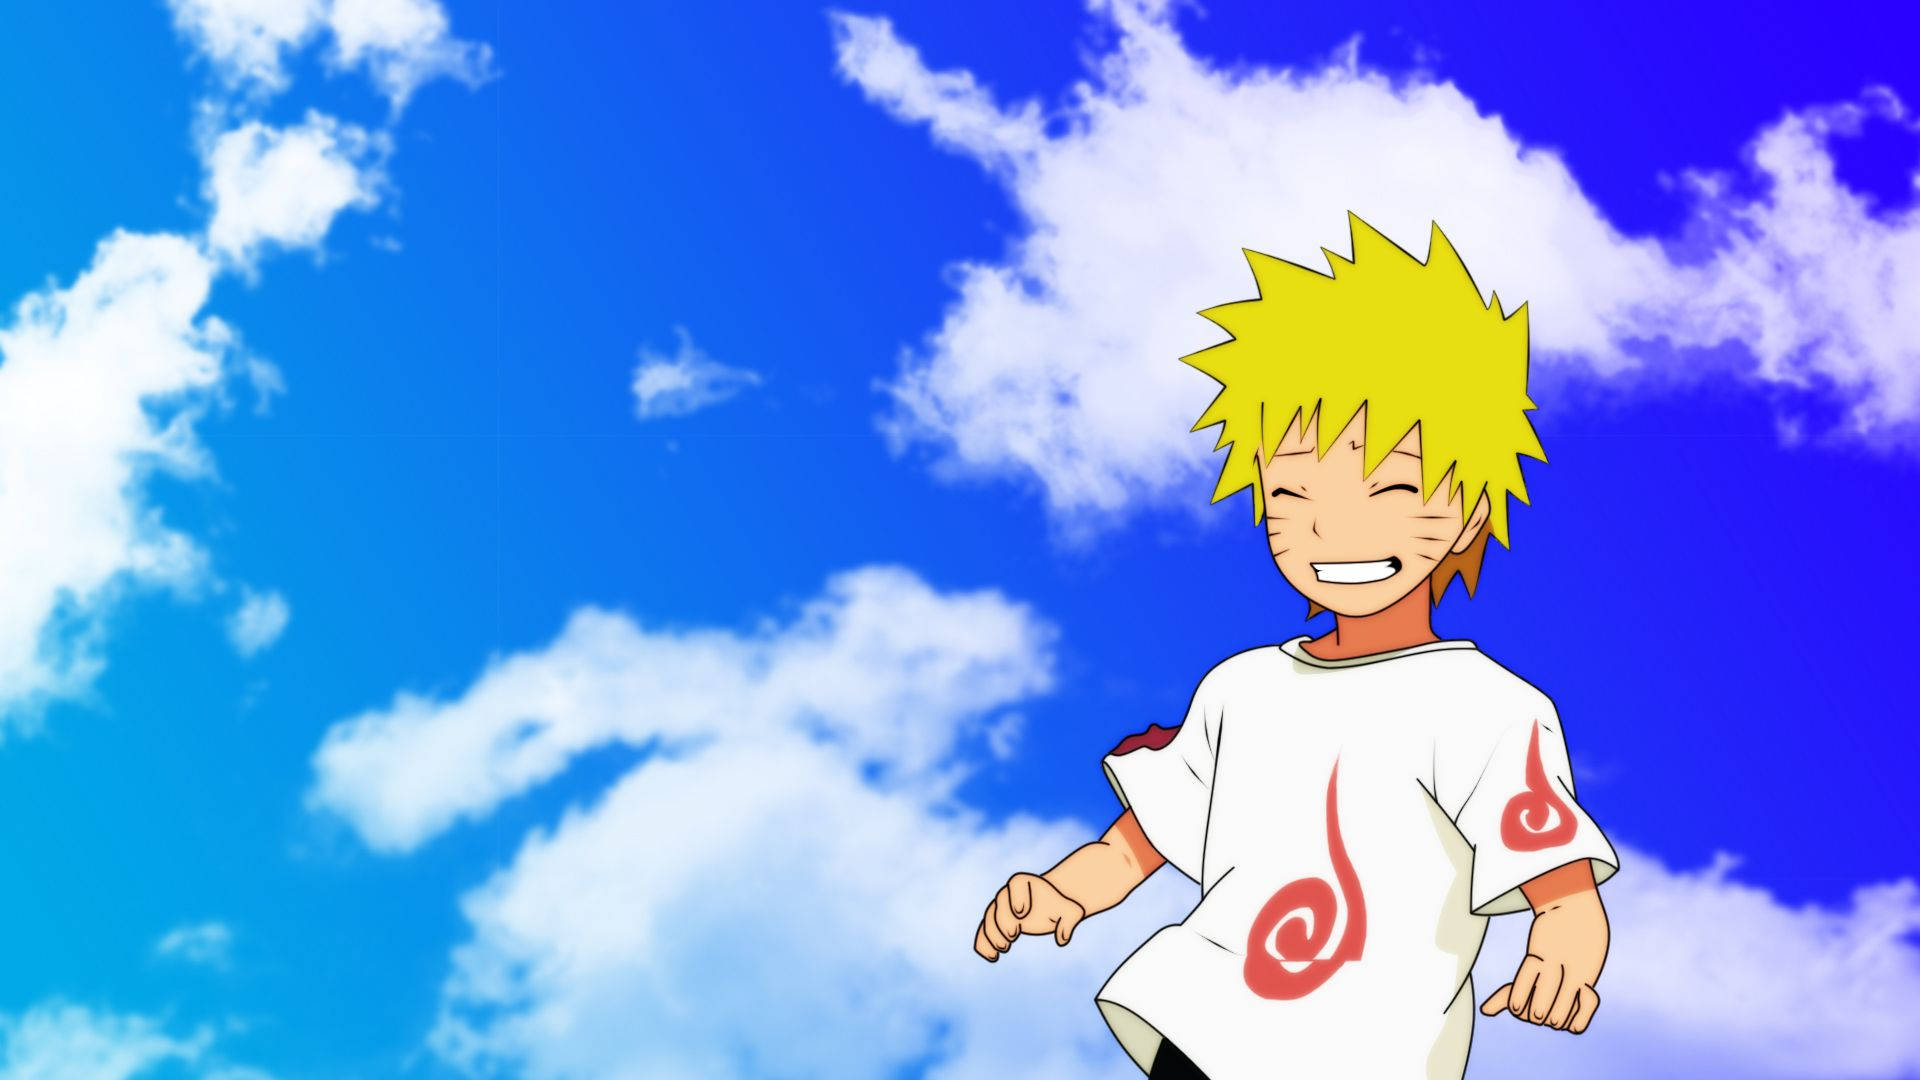 Little Naruto with a big smile wallpaper.